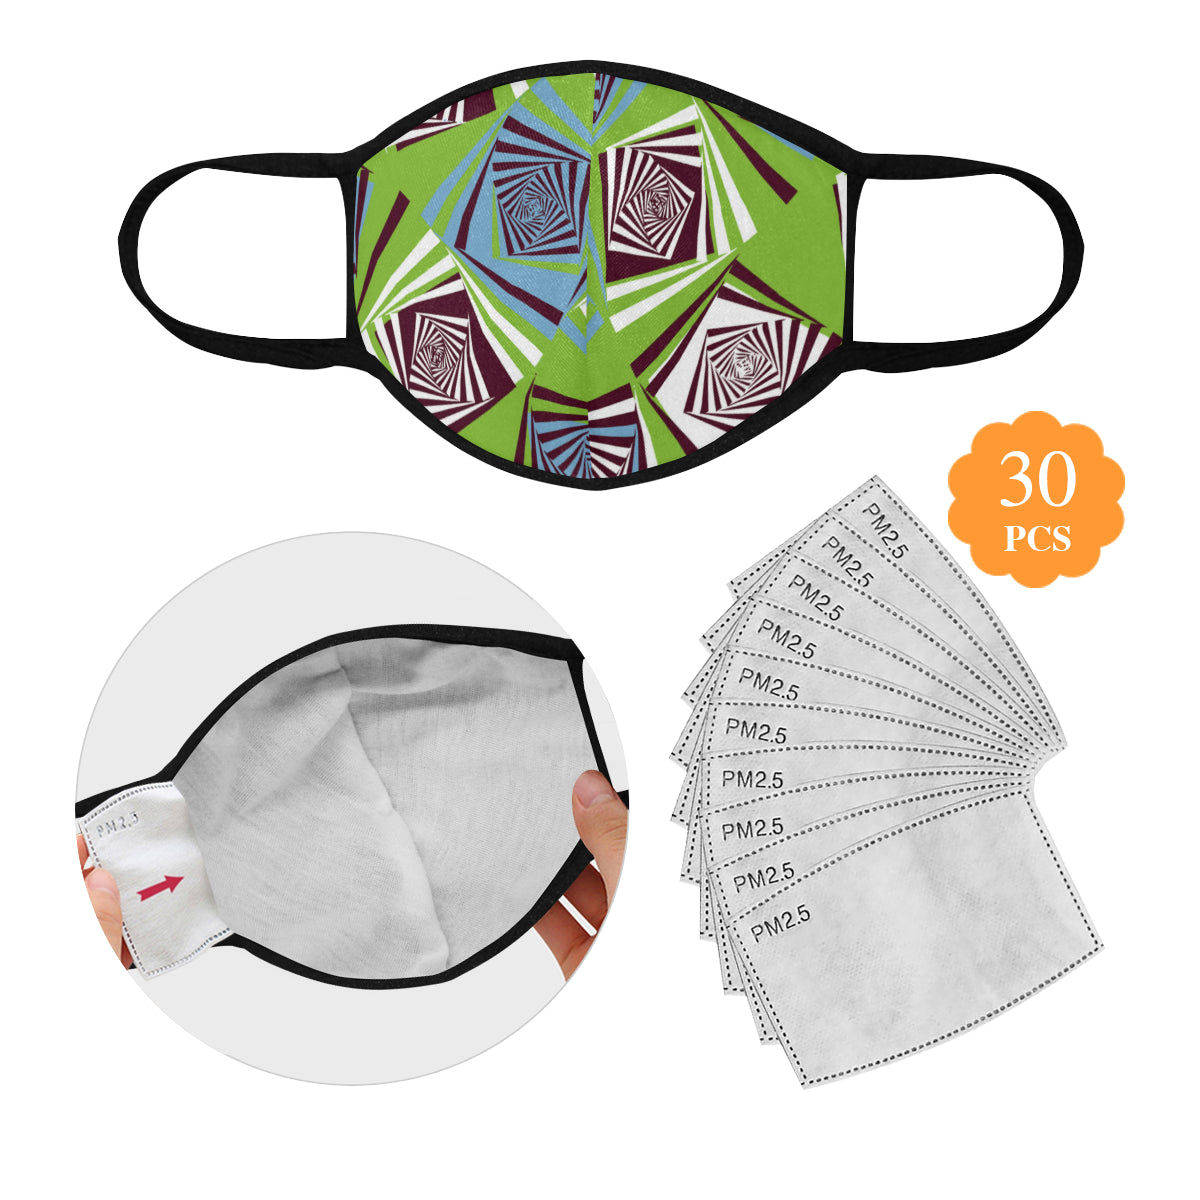 Swirl Leopard Stripes Cotton Fabric Face Mask with filter slot (30 Filters Included) - Non-medical use